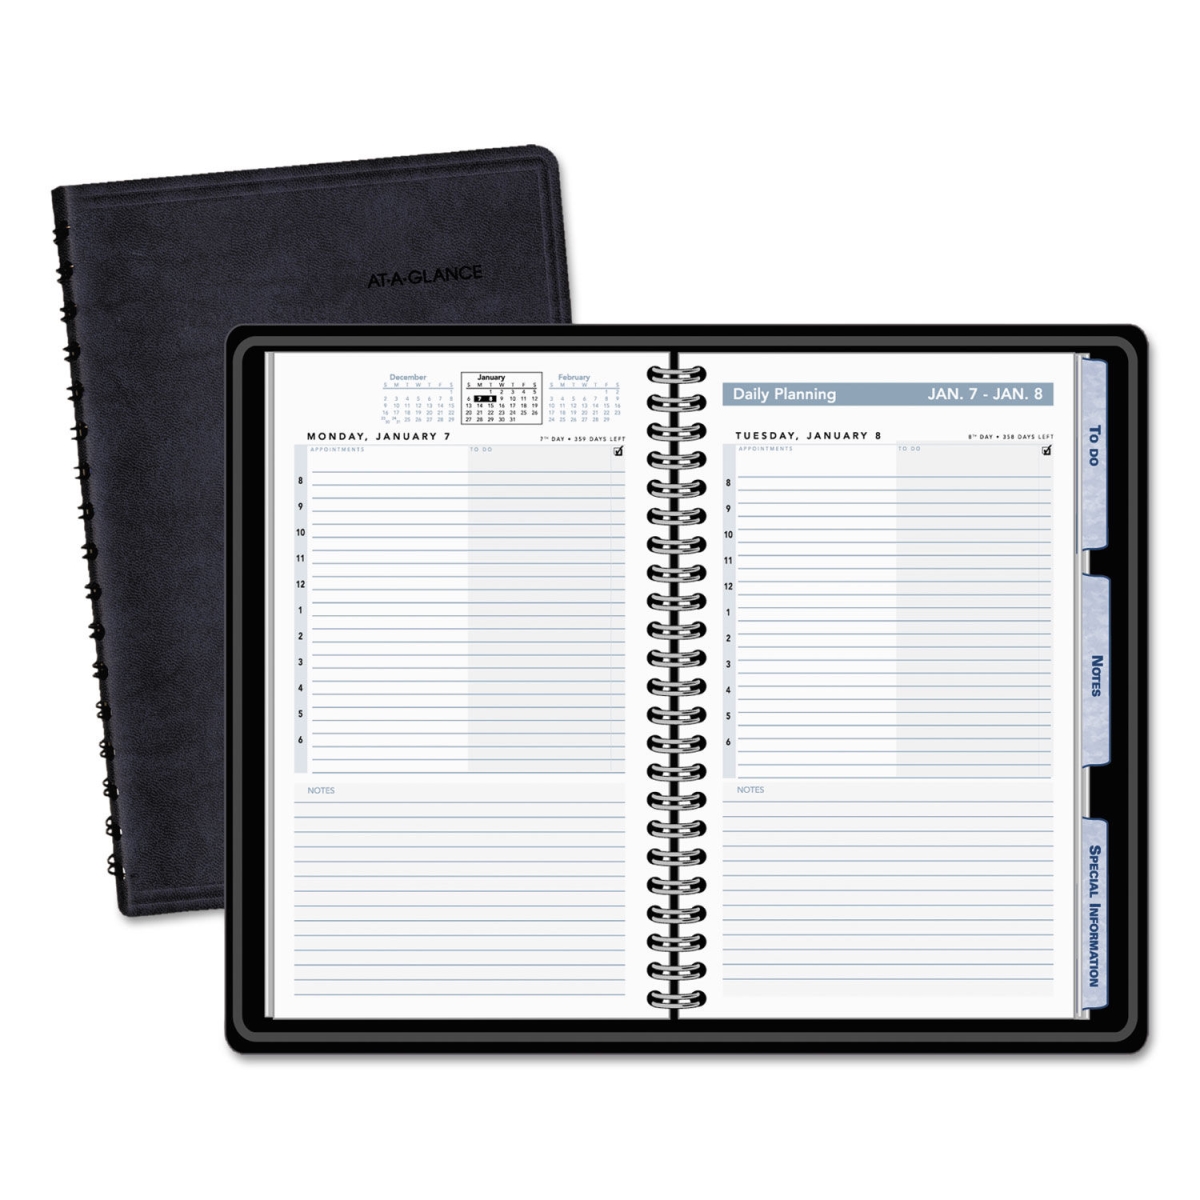 Aag70ep0405 The Action Planner Daily Appointment Book For 2019, Black - 4.75 X 8 In.